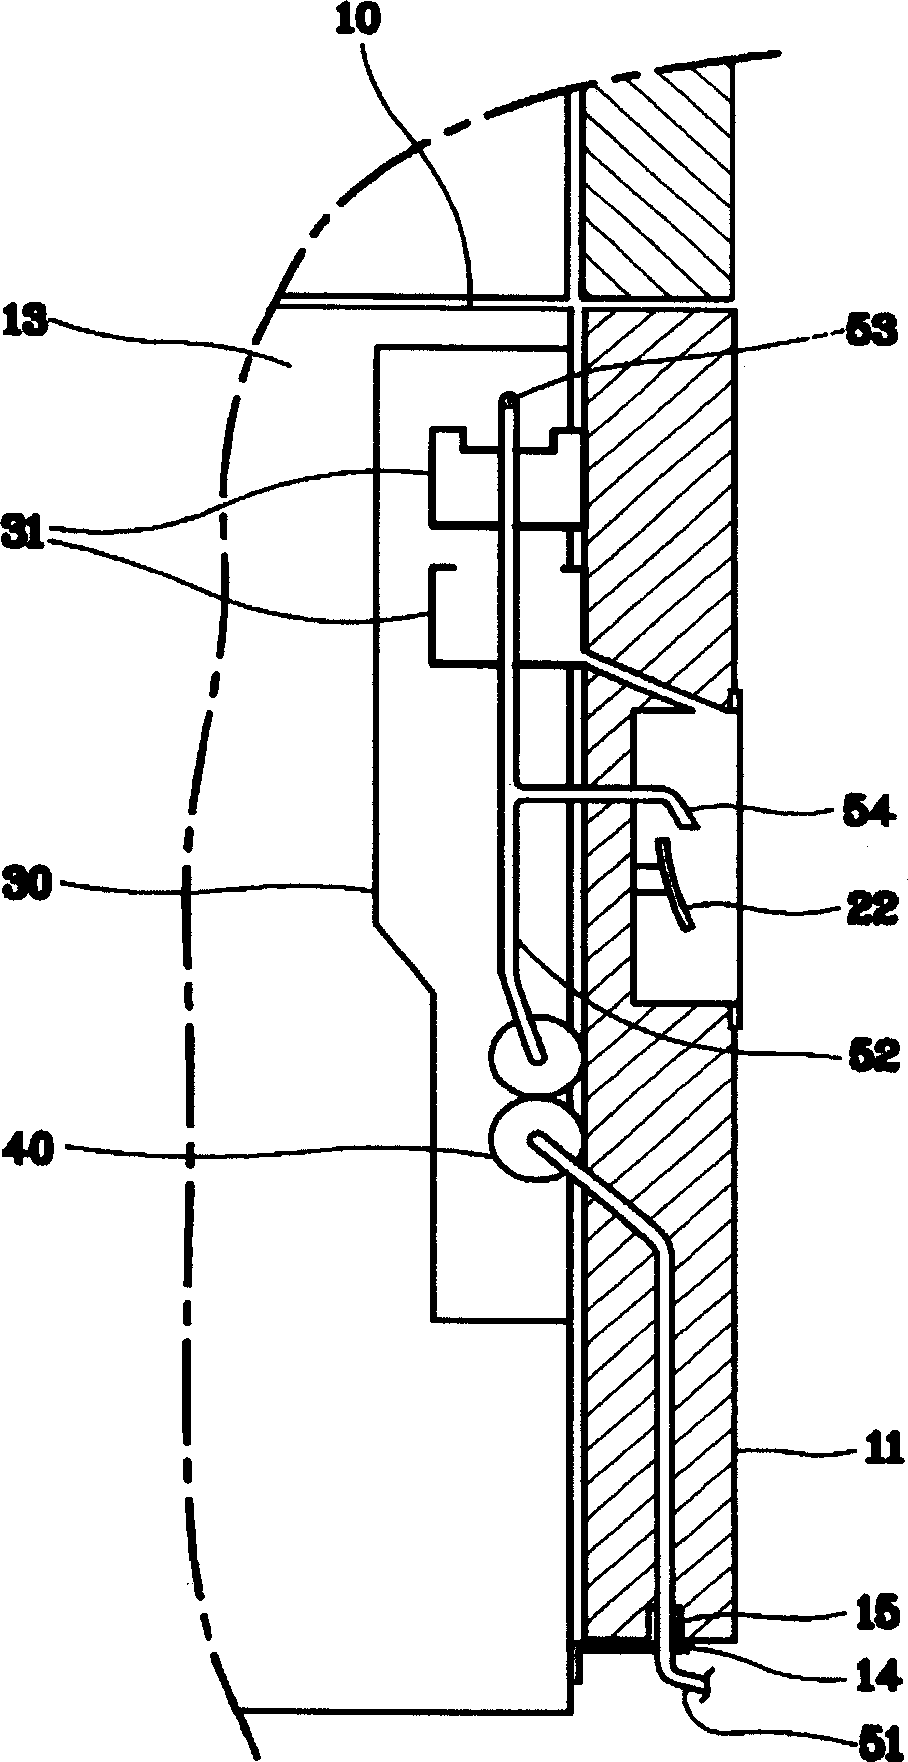 Water supplying pipe of distributor for refrigerator